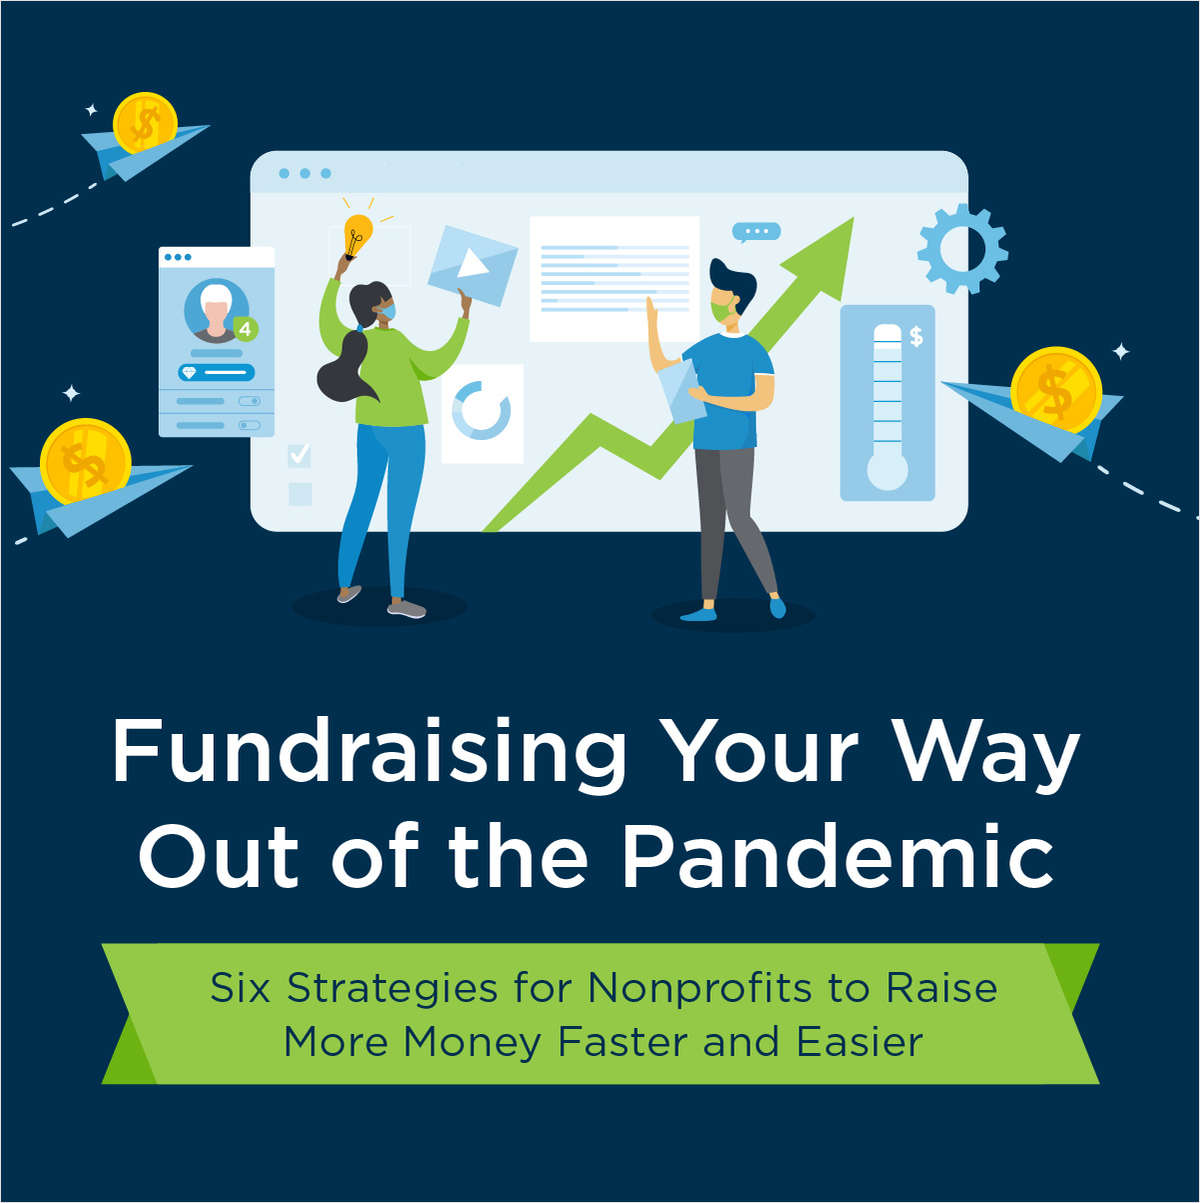 Fundraising Your Way Out of the Pandemic